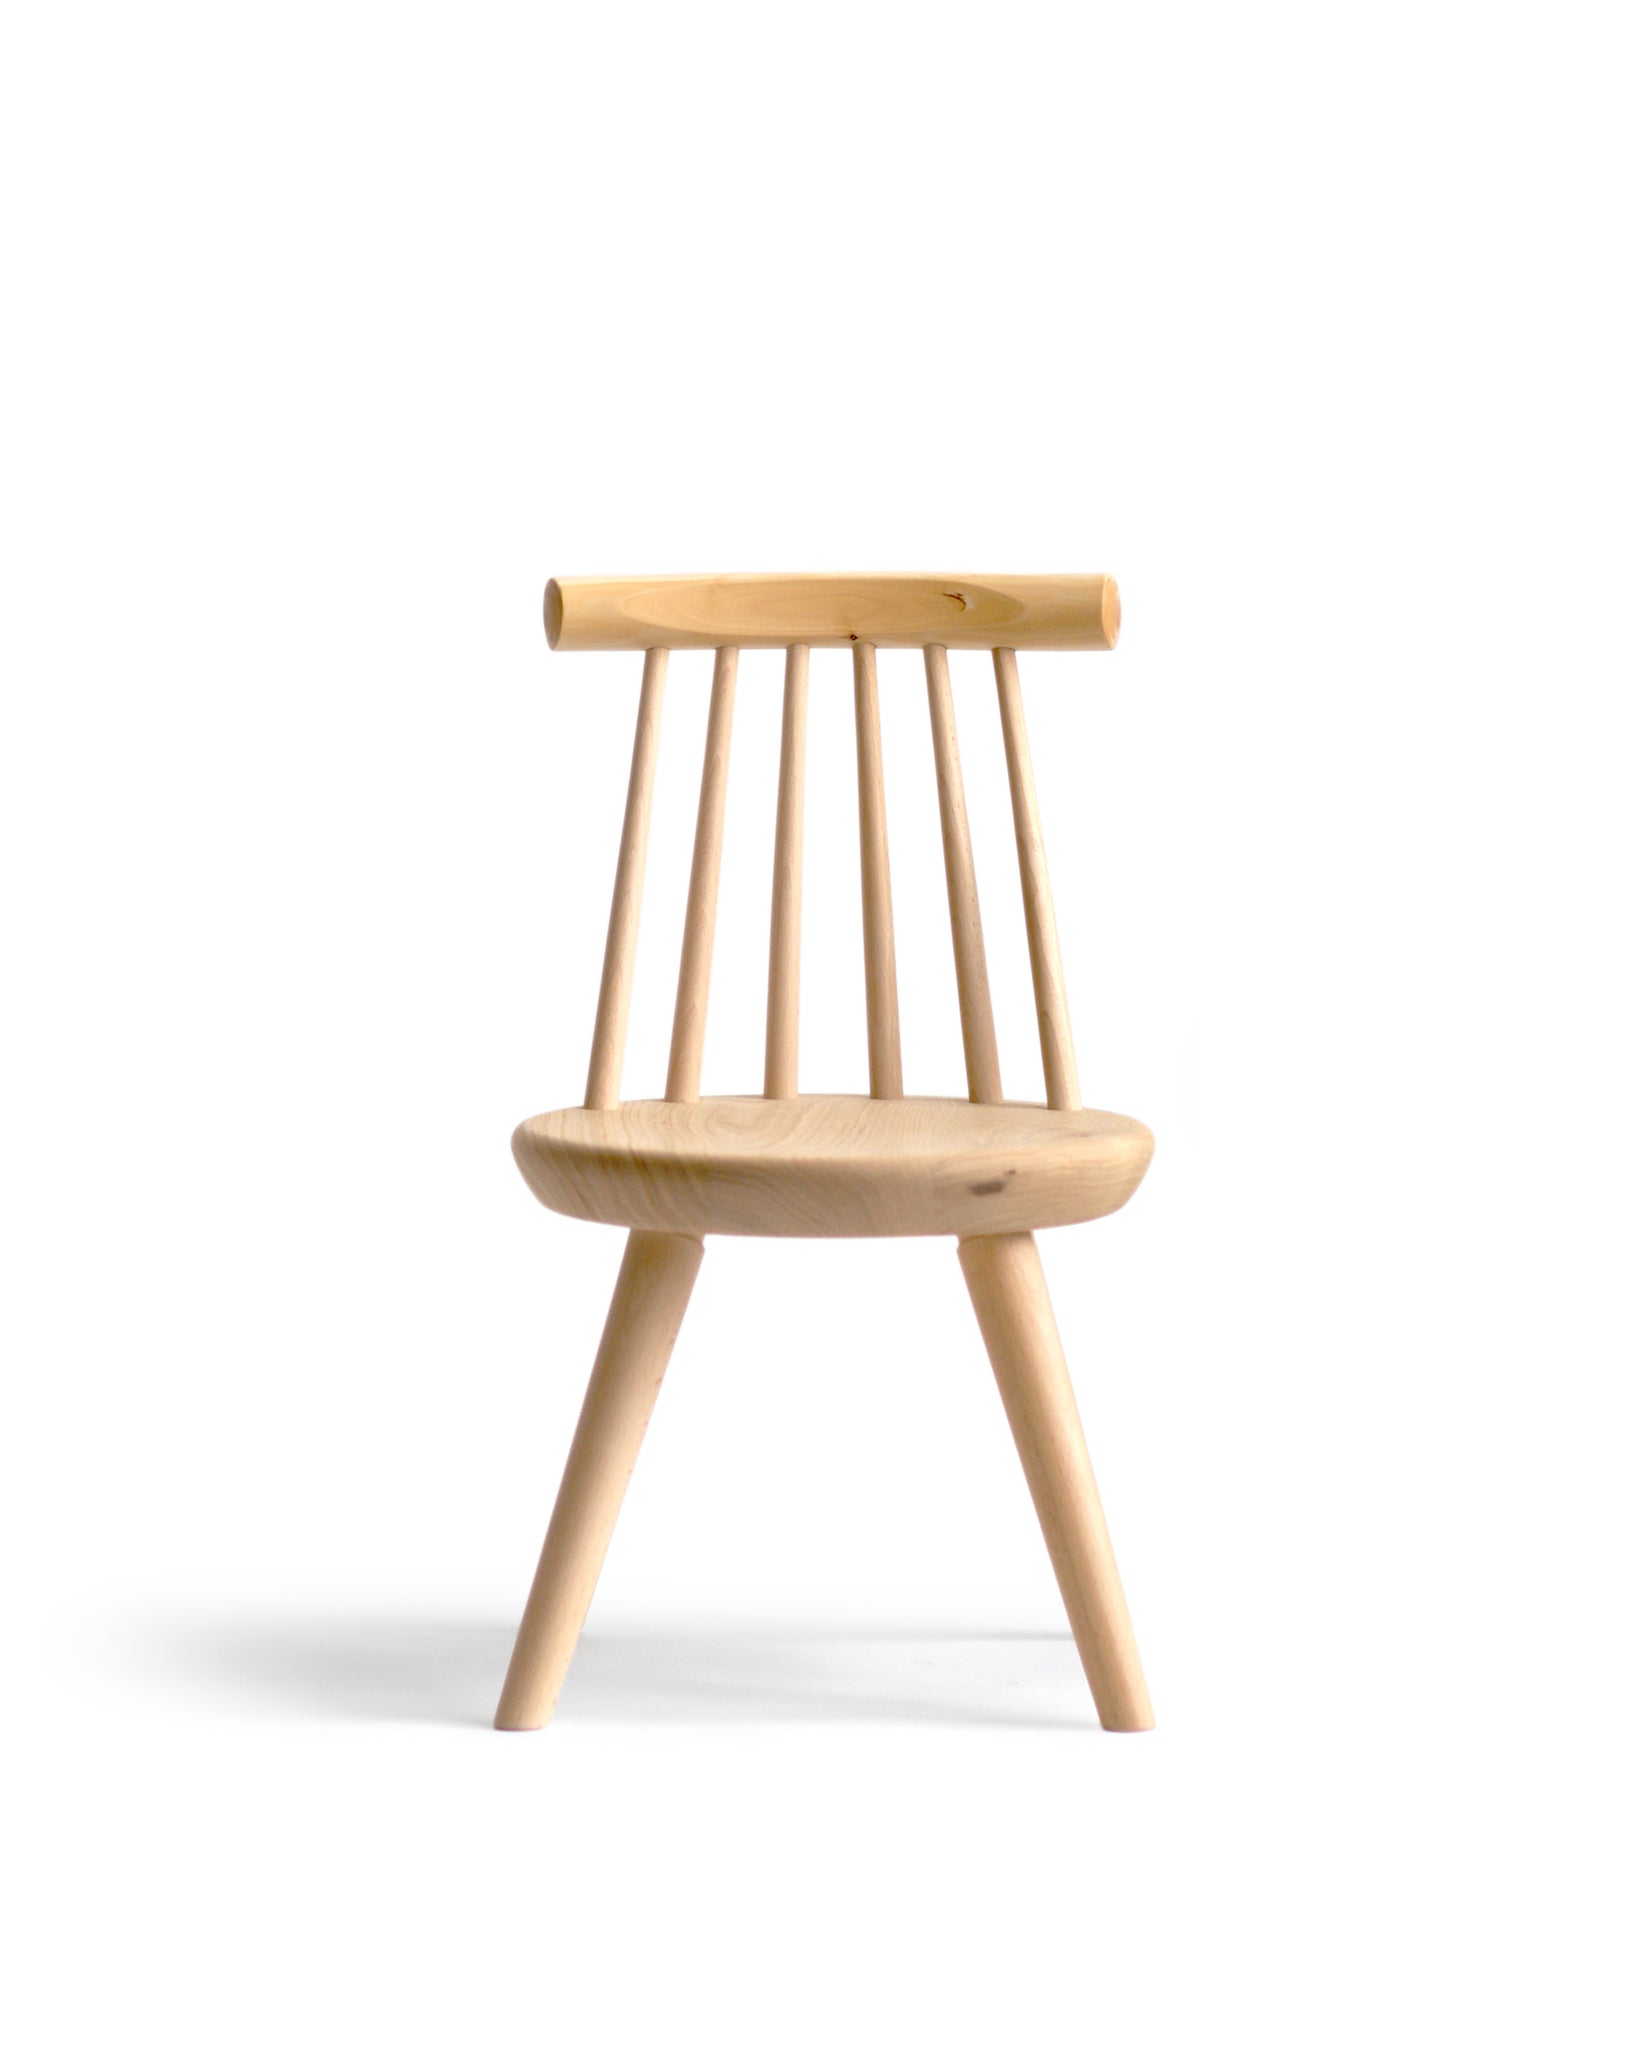 Silhouetted image of the Kinoe Kids Chair against a white background.